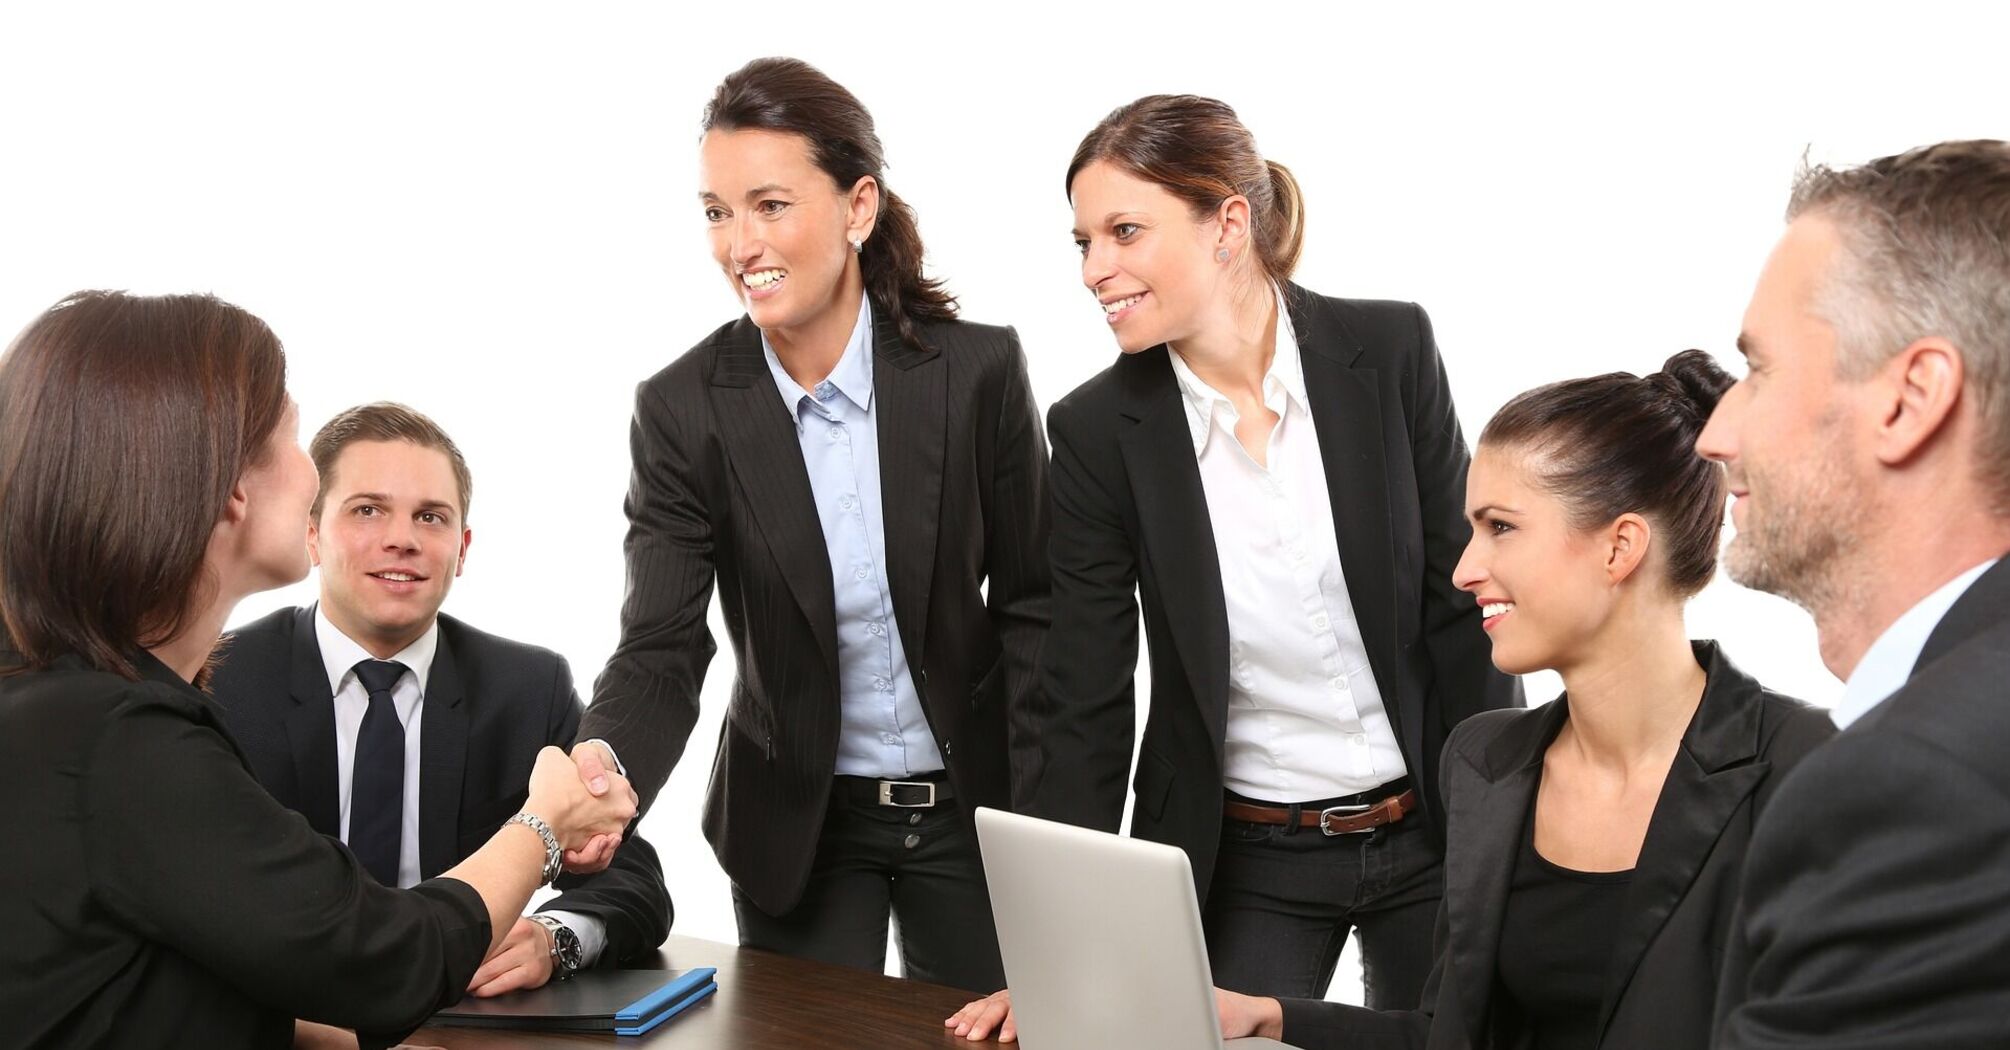 A group of professionals around a table with a laptop, engaging in a handshake and collaborative discussion